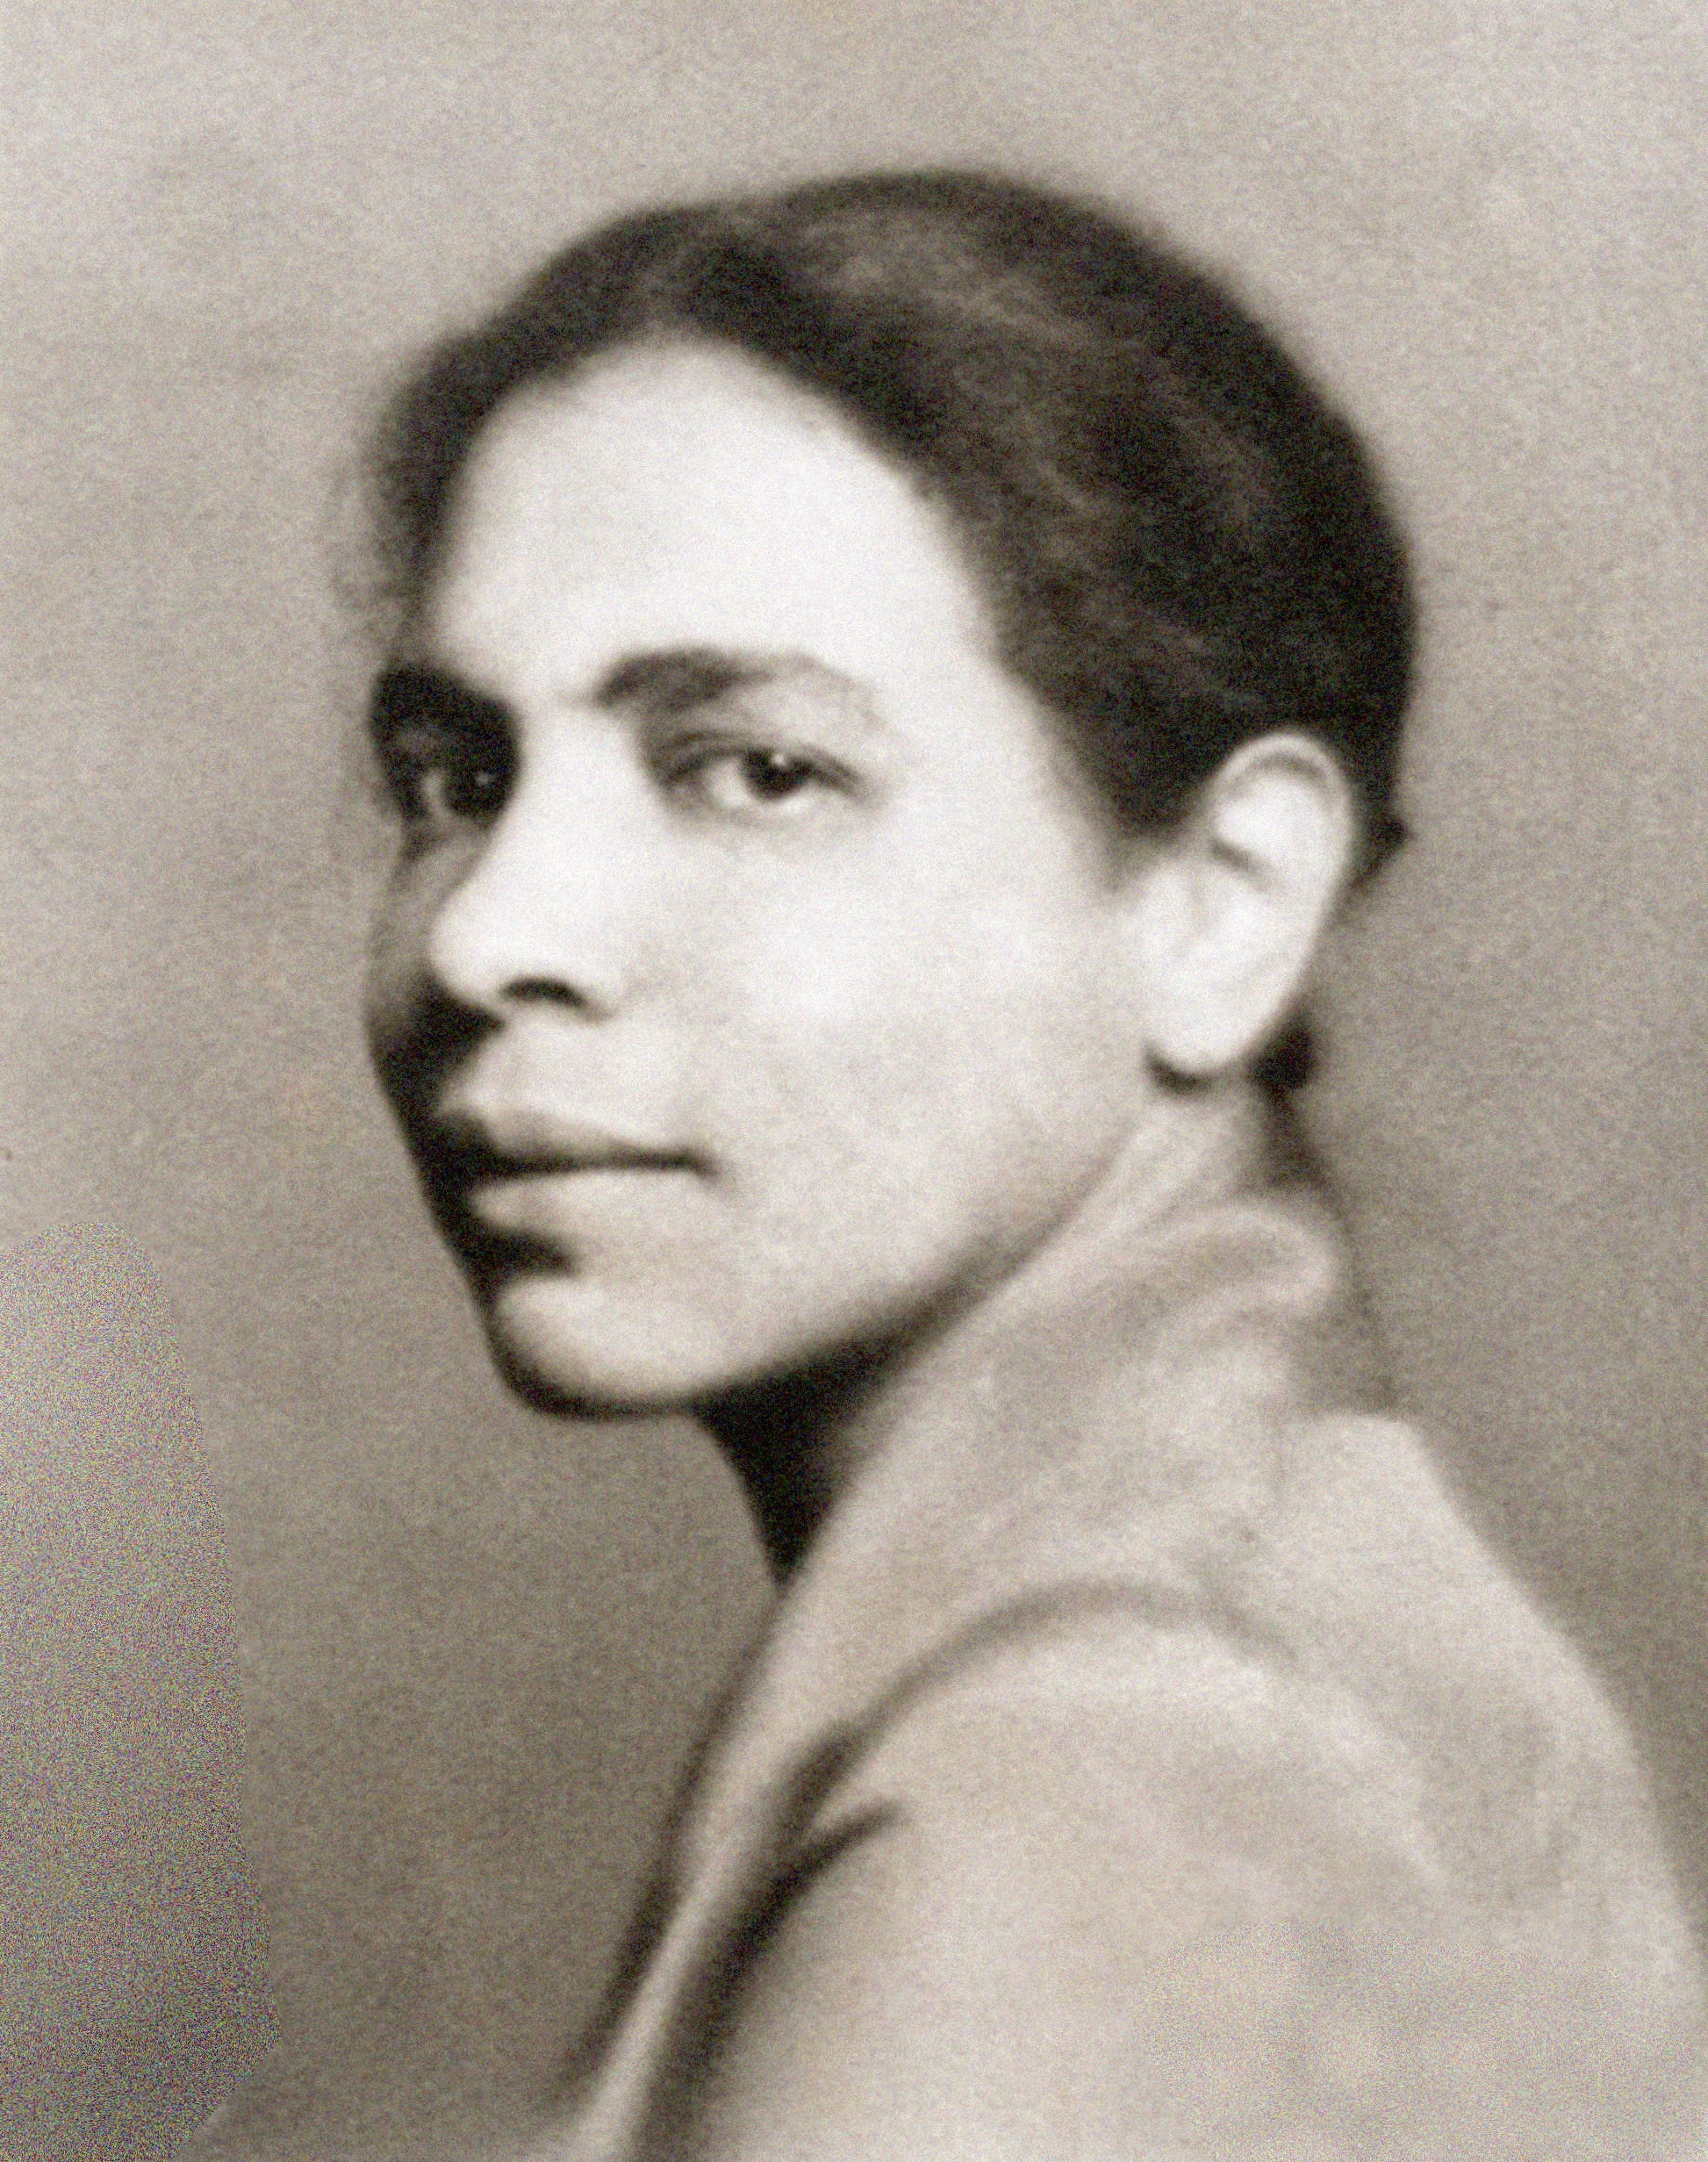 Black and white portrait of a person with short, dark hair, wearing a light-colored garment, looking over their left shoulder directly at the camera. The background is plain and blurred.